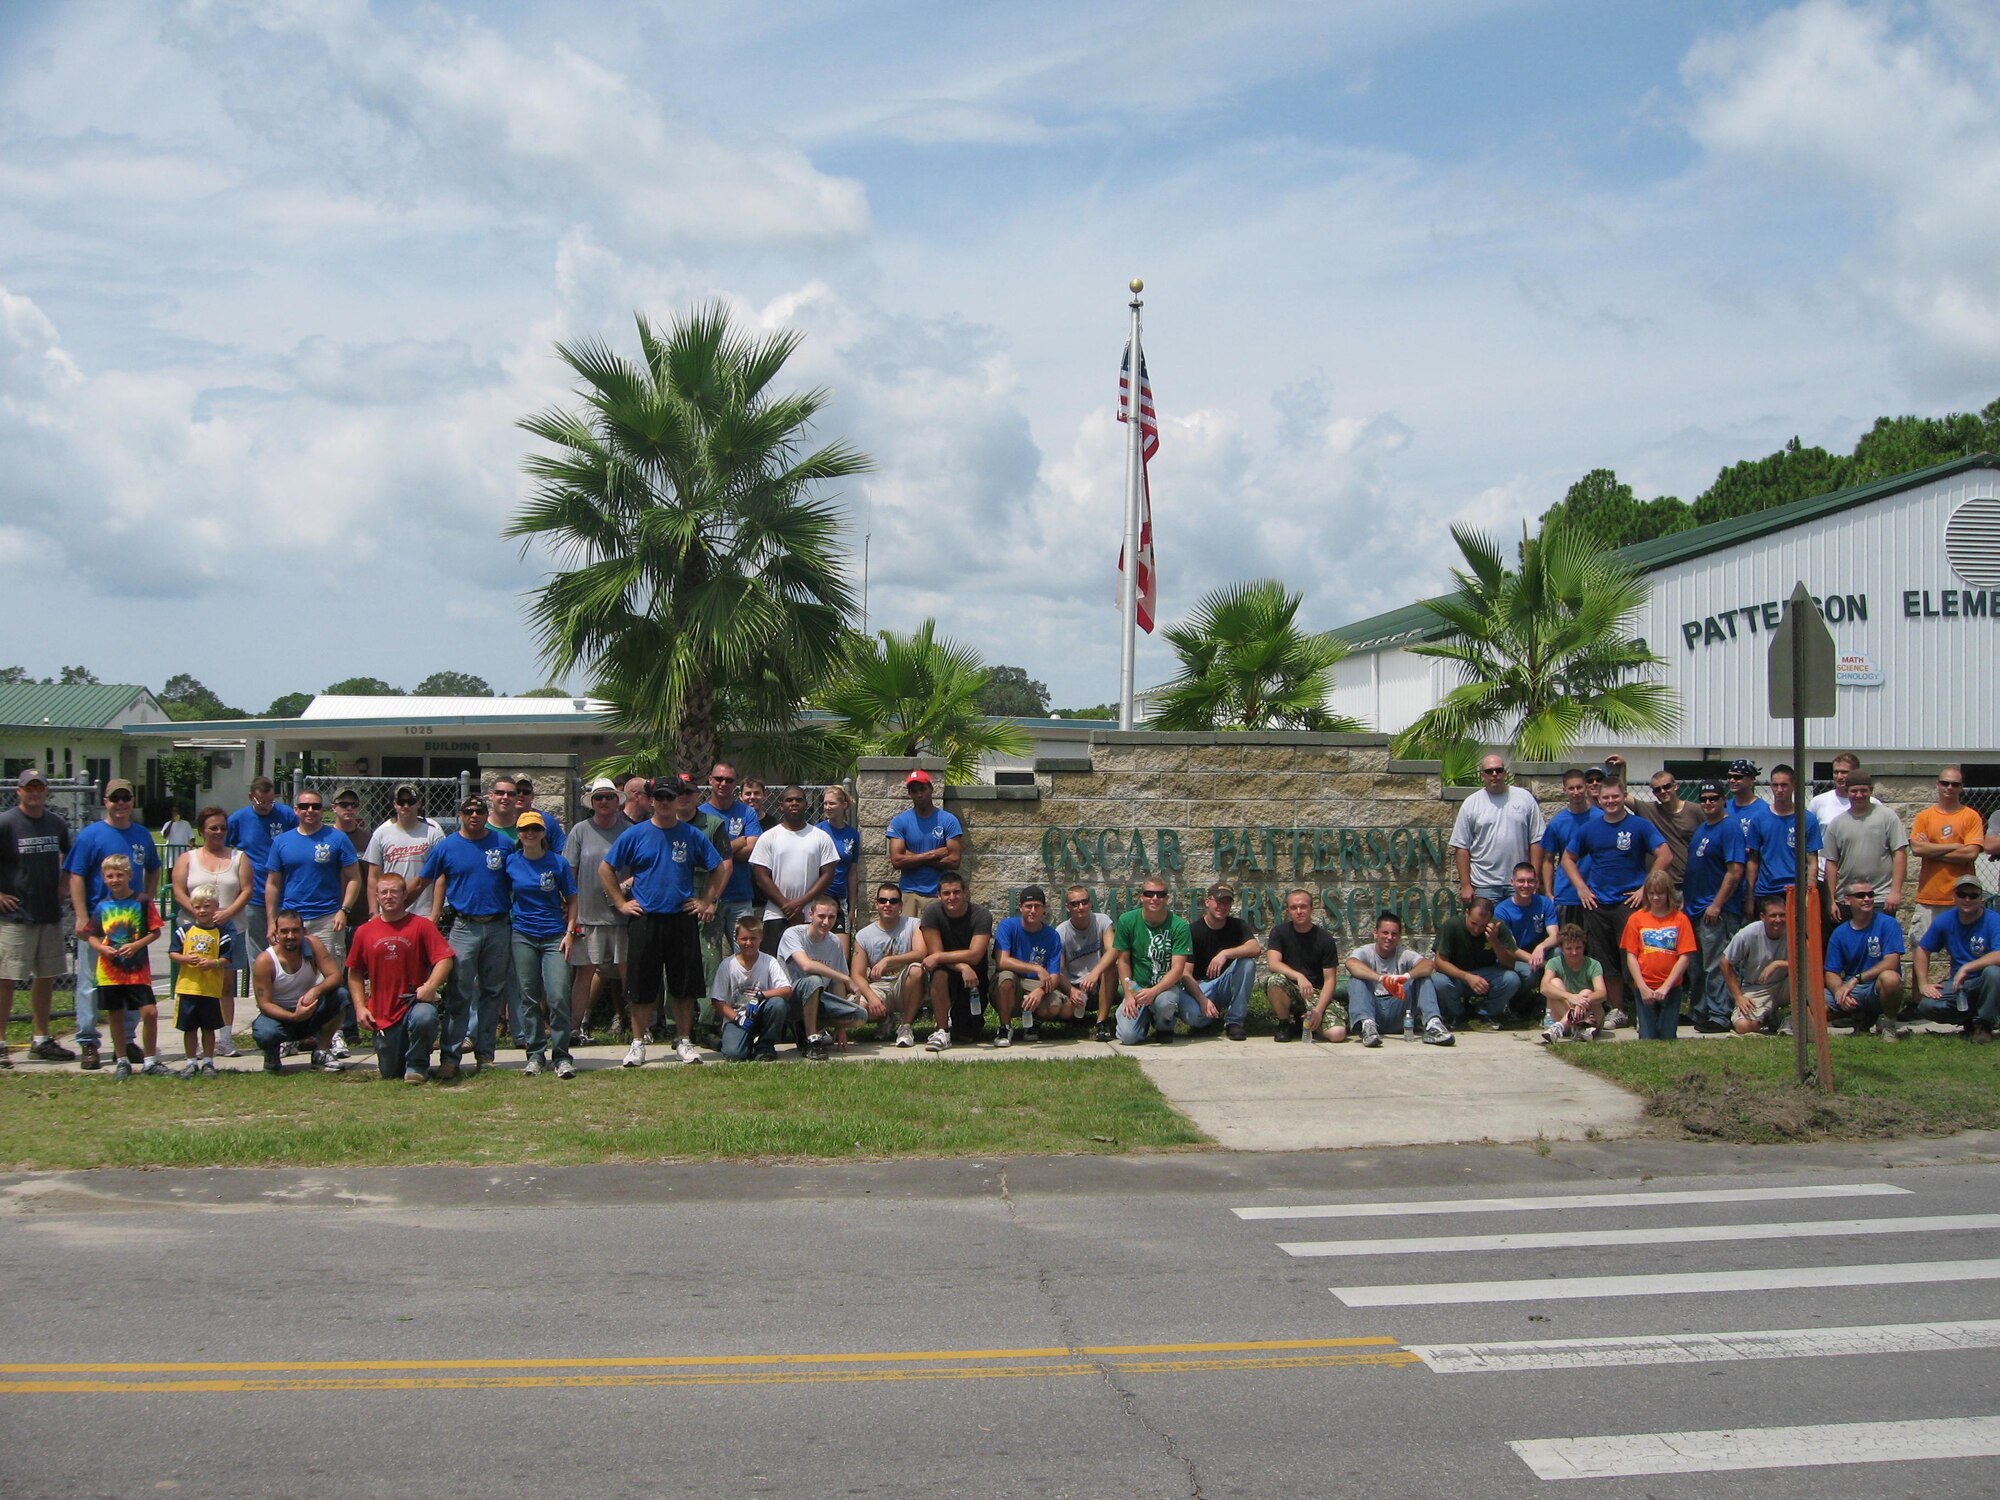 Volunteers from the 95th Aircraft Maintenance Unit gathered to help clean up Oscar Patterson Elementary for them to open their doors on time for the school year.  (Courtesy photo)